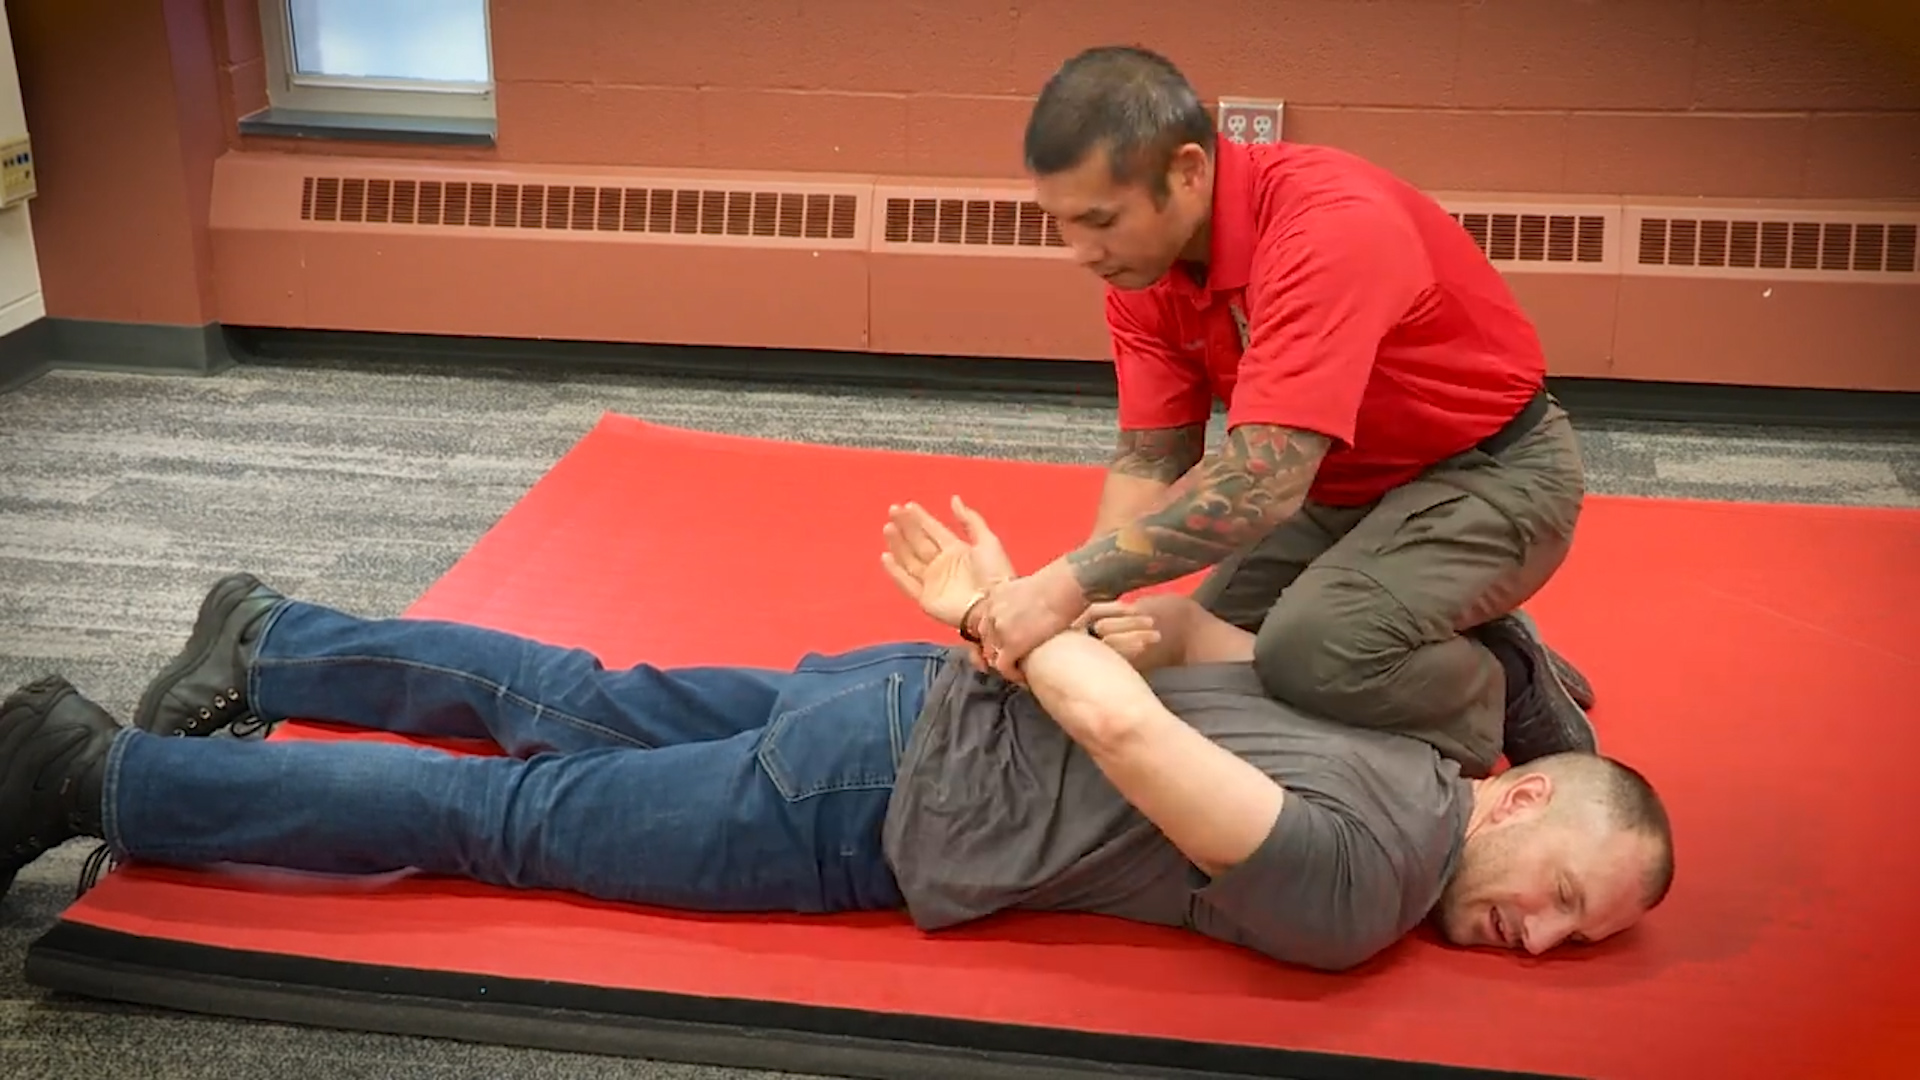 The police training video was released Thursday afternoon that shows how to use neck restraints.